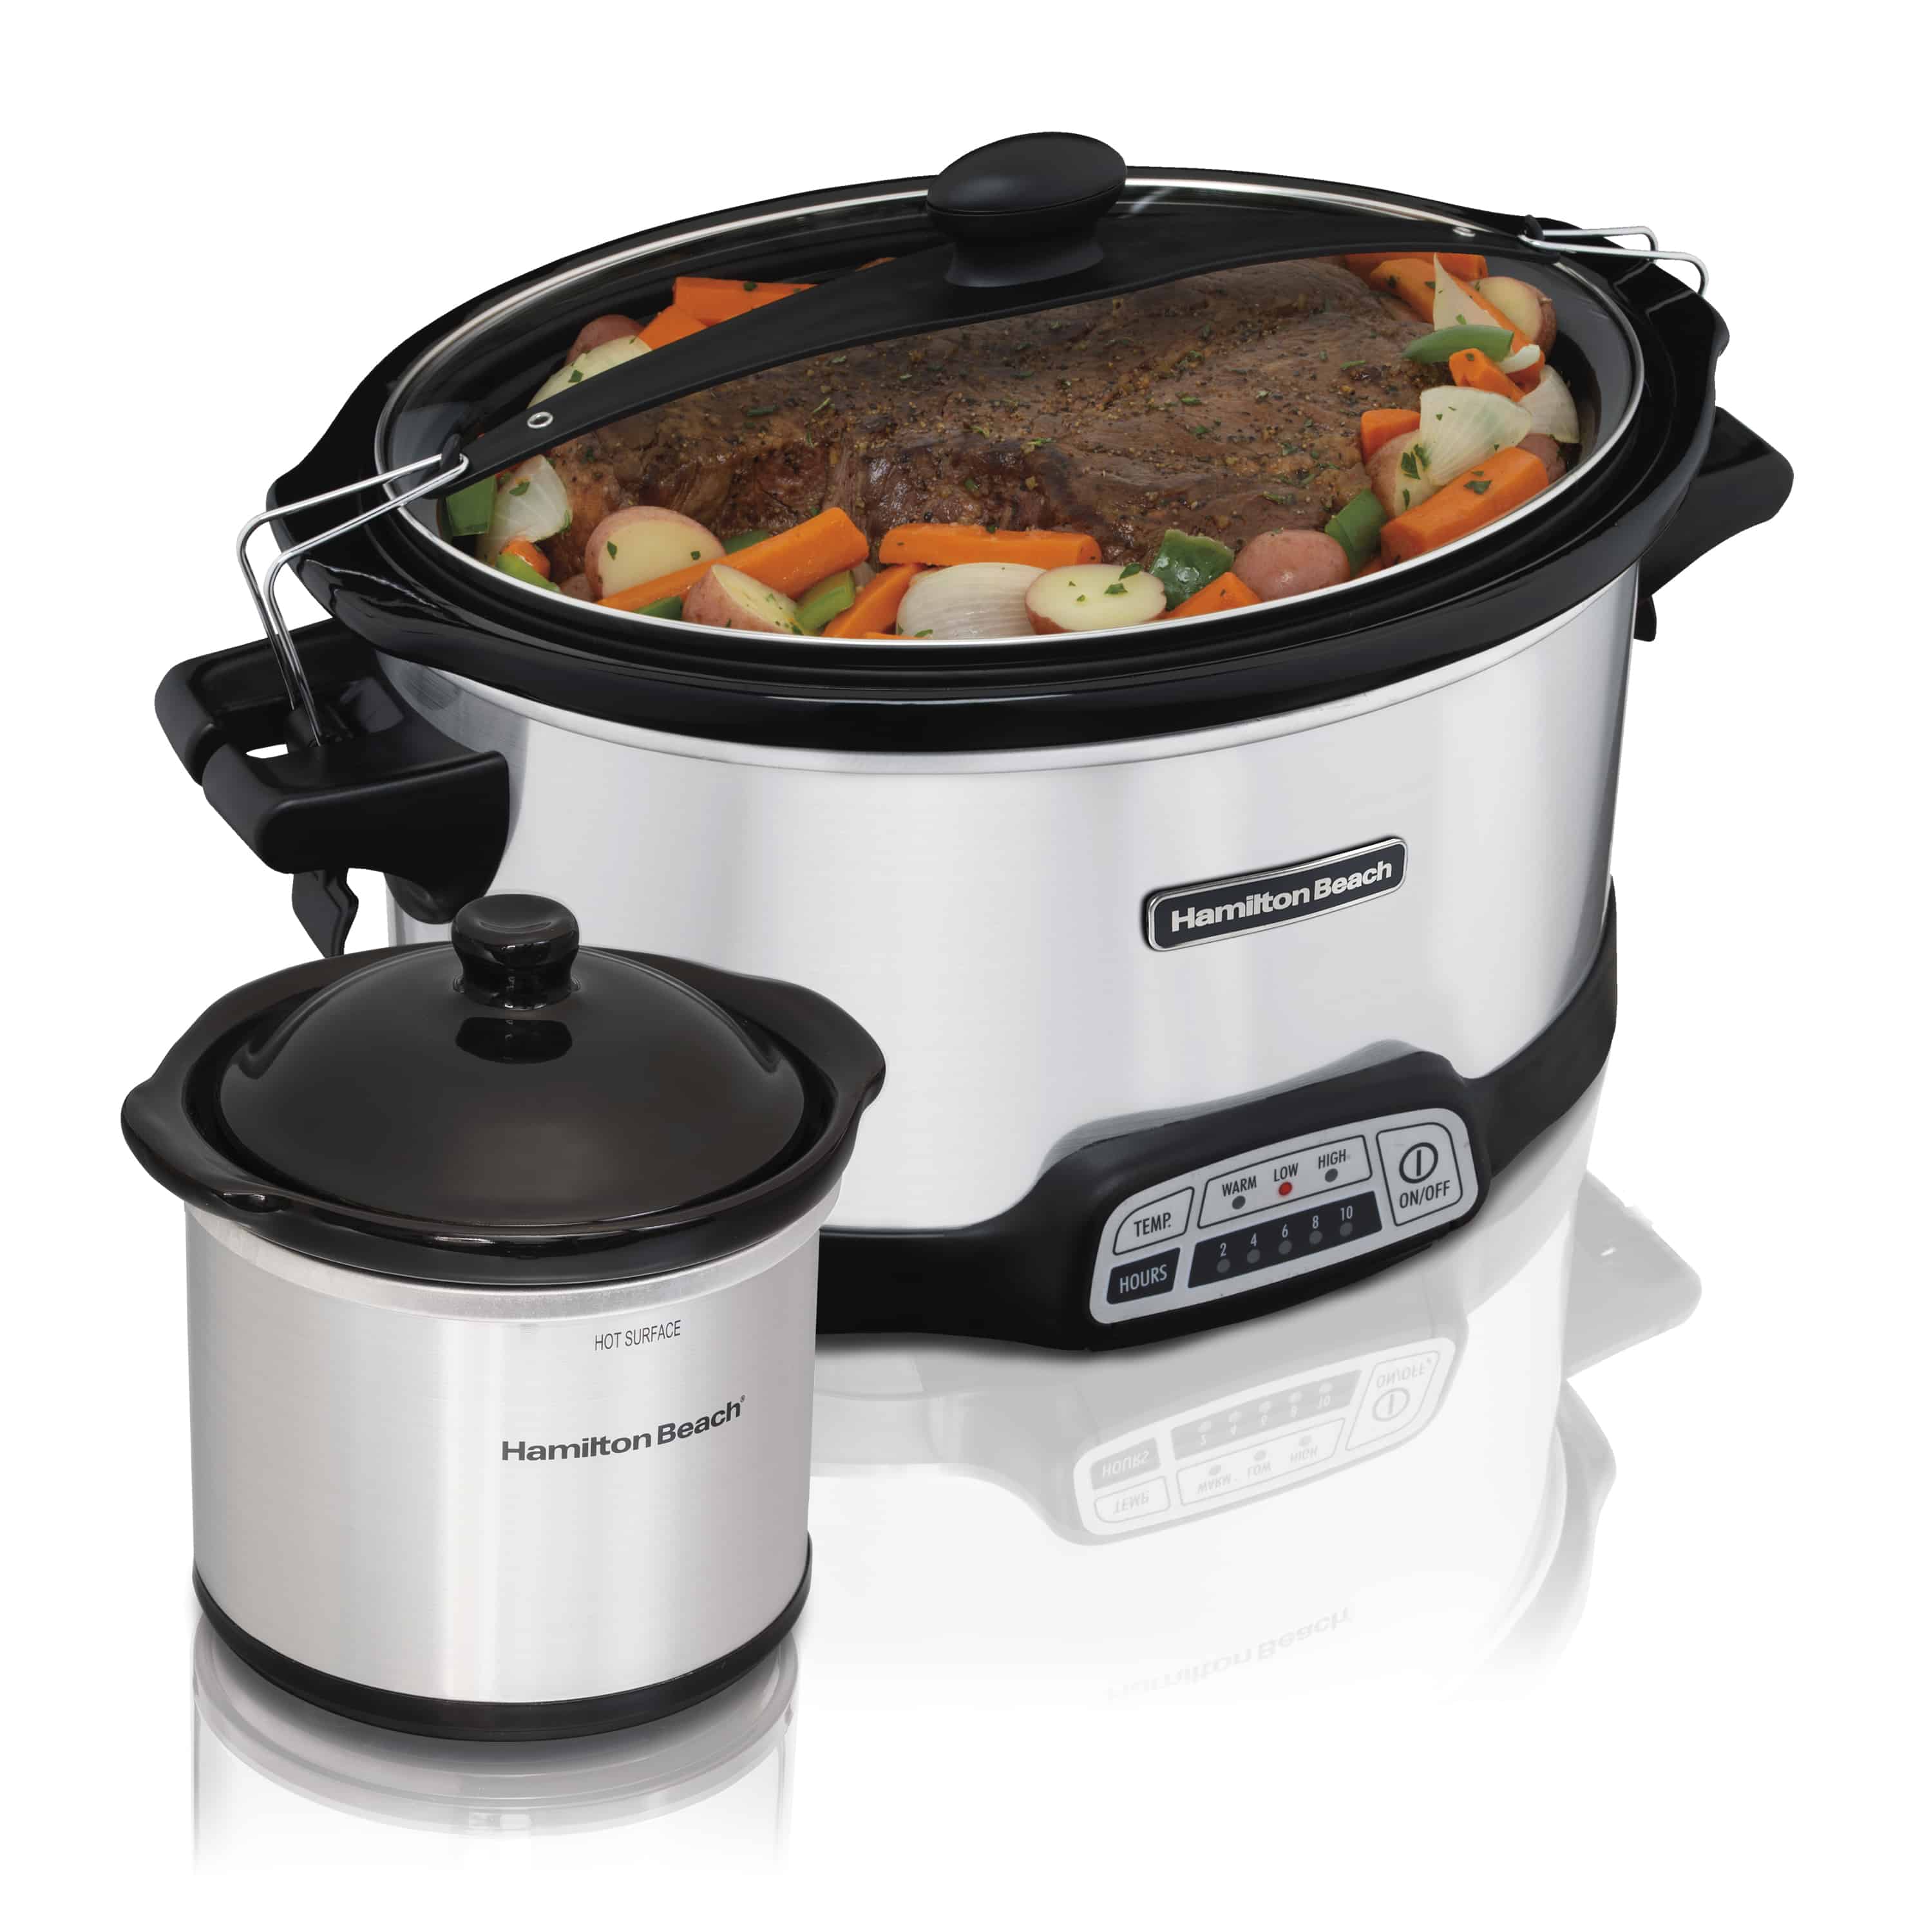 Hamilton Beach 7 Quart Stay or Go Programmable Slow Cooker with Party Dipper $34.99 {Reg $45}